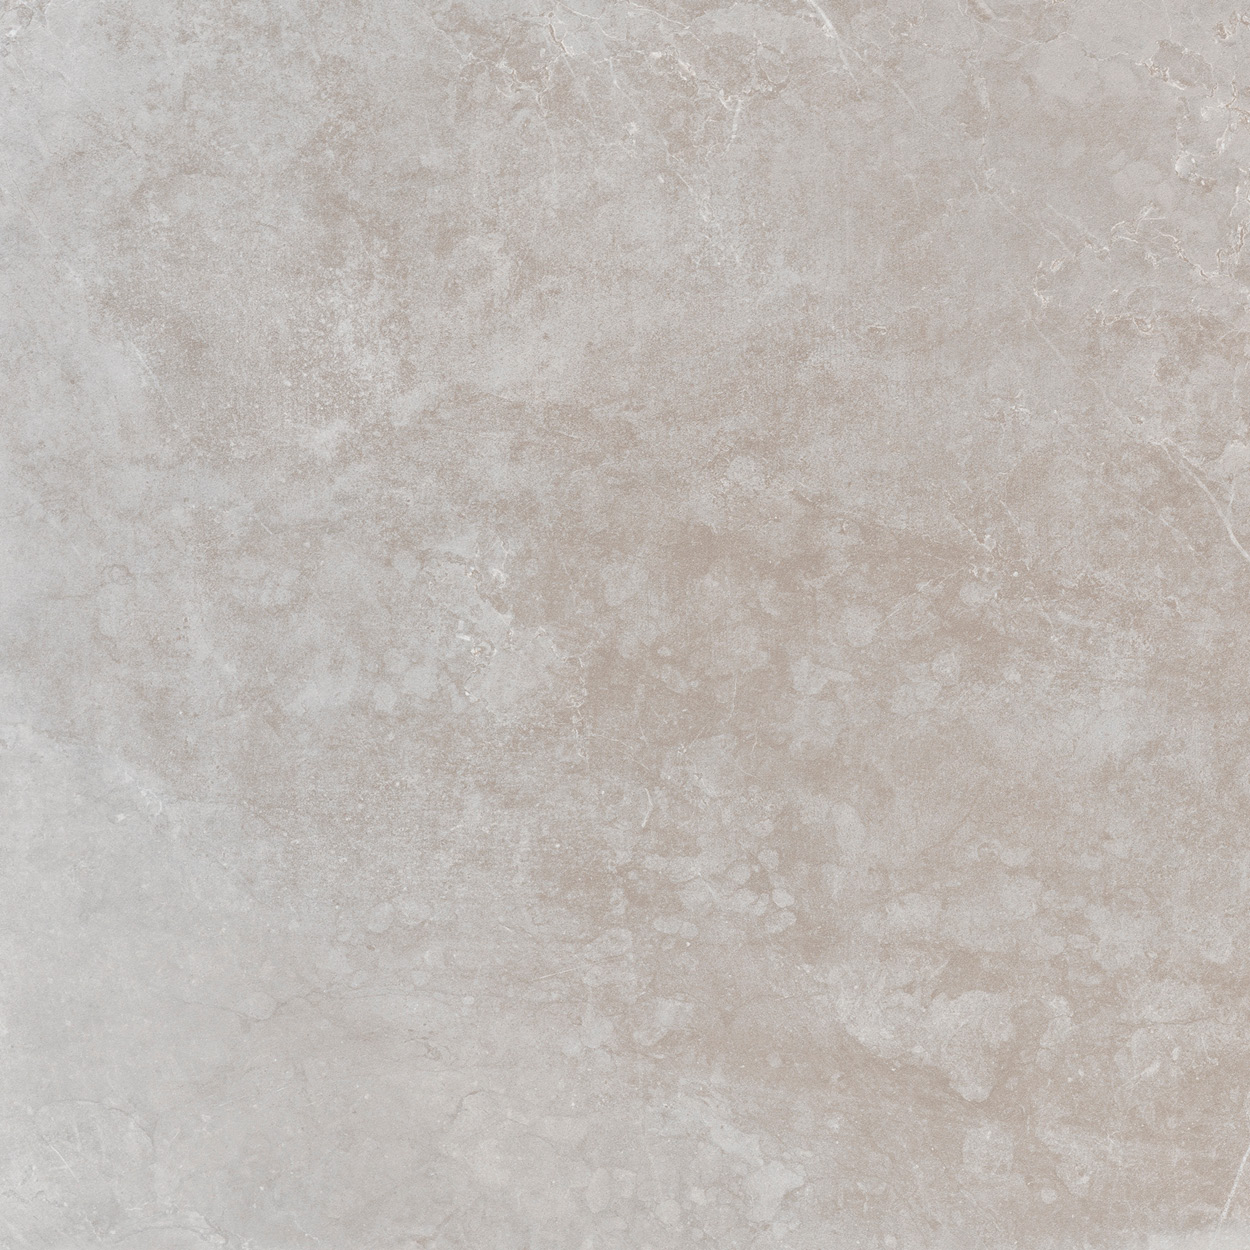 24 x 48 Evo Stone Mist  finished Rectified Porcelain Tile (SPECIAL ORDER ONLY)